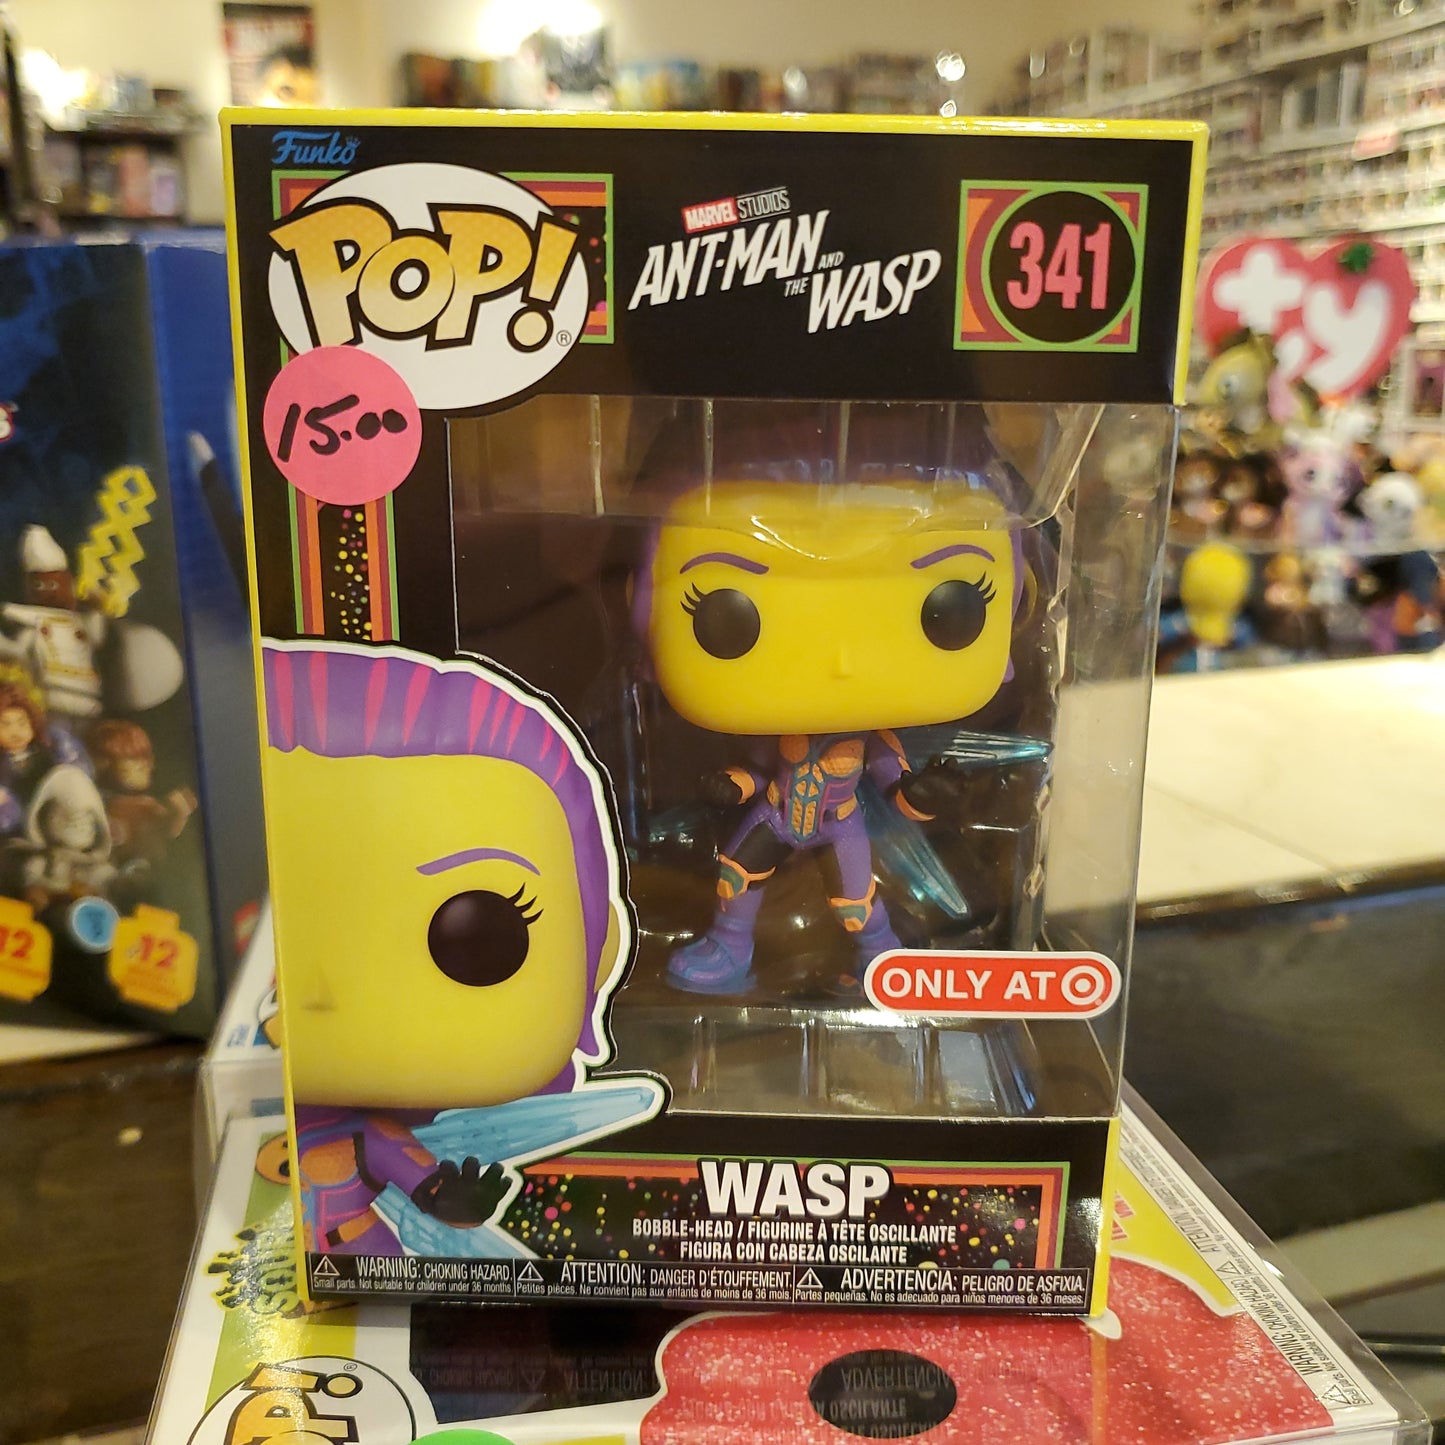 Marvel Ant-Man and the Wasp - Wasp #341 - Funko Pop Vinyl Figure